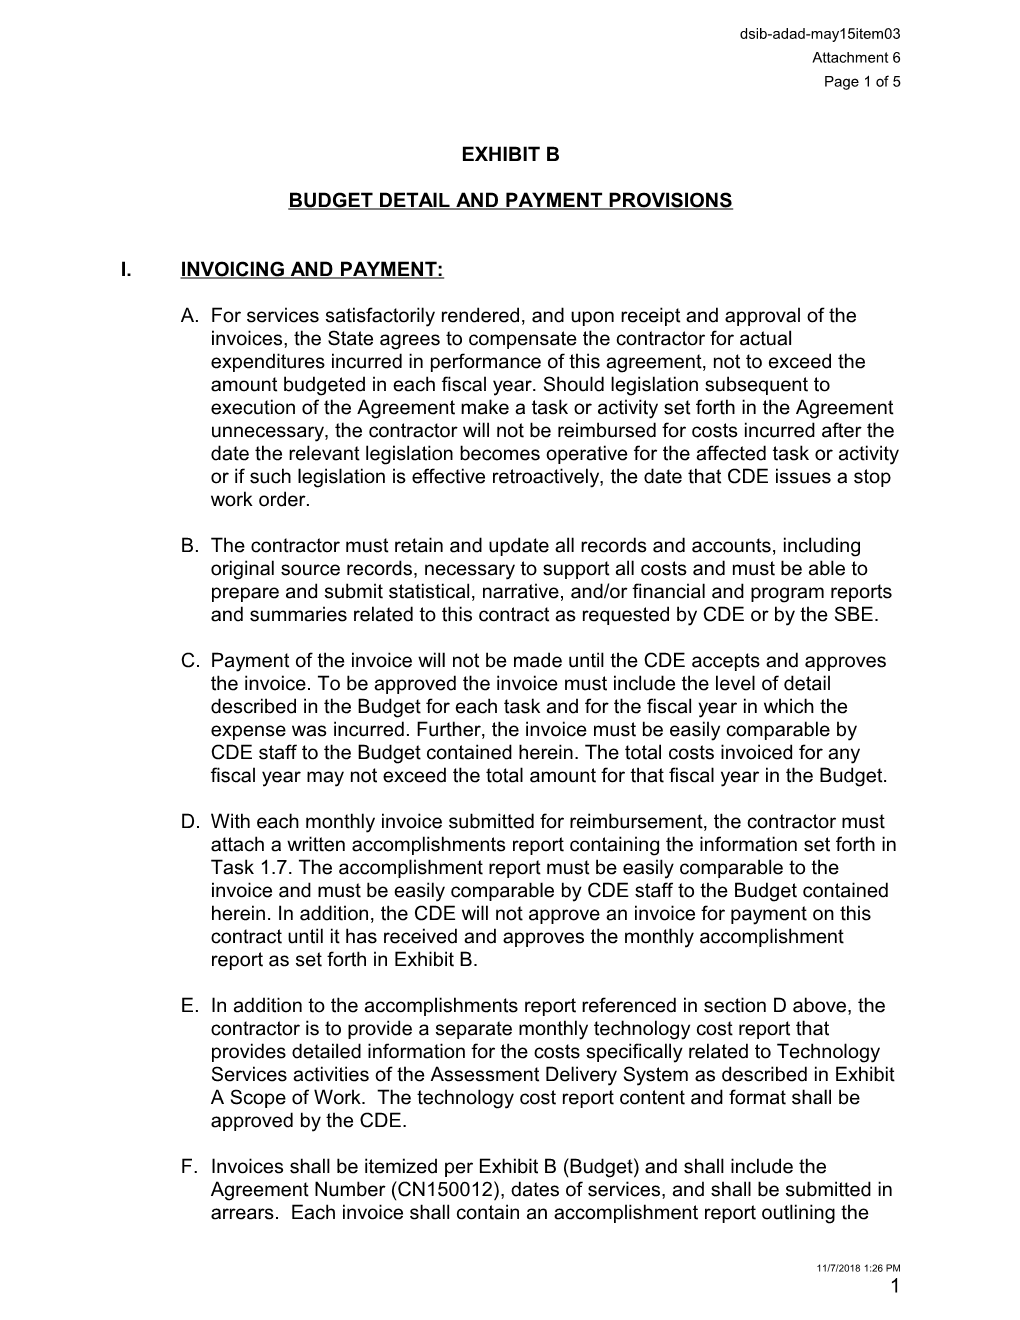 May 2015 Agenda Item 01 Attachment 6 - Meeting Agendas (CA State Board of Education)